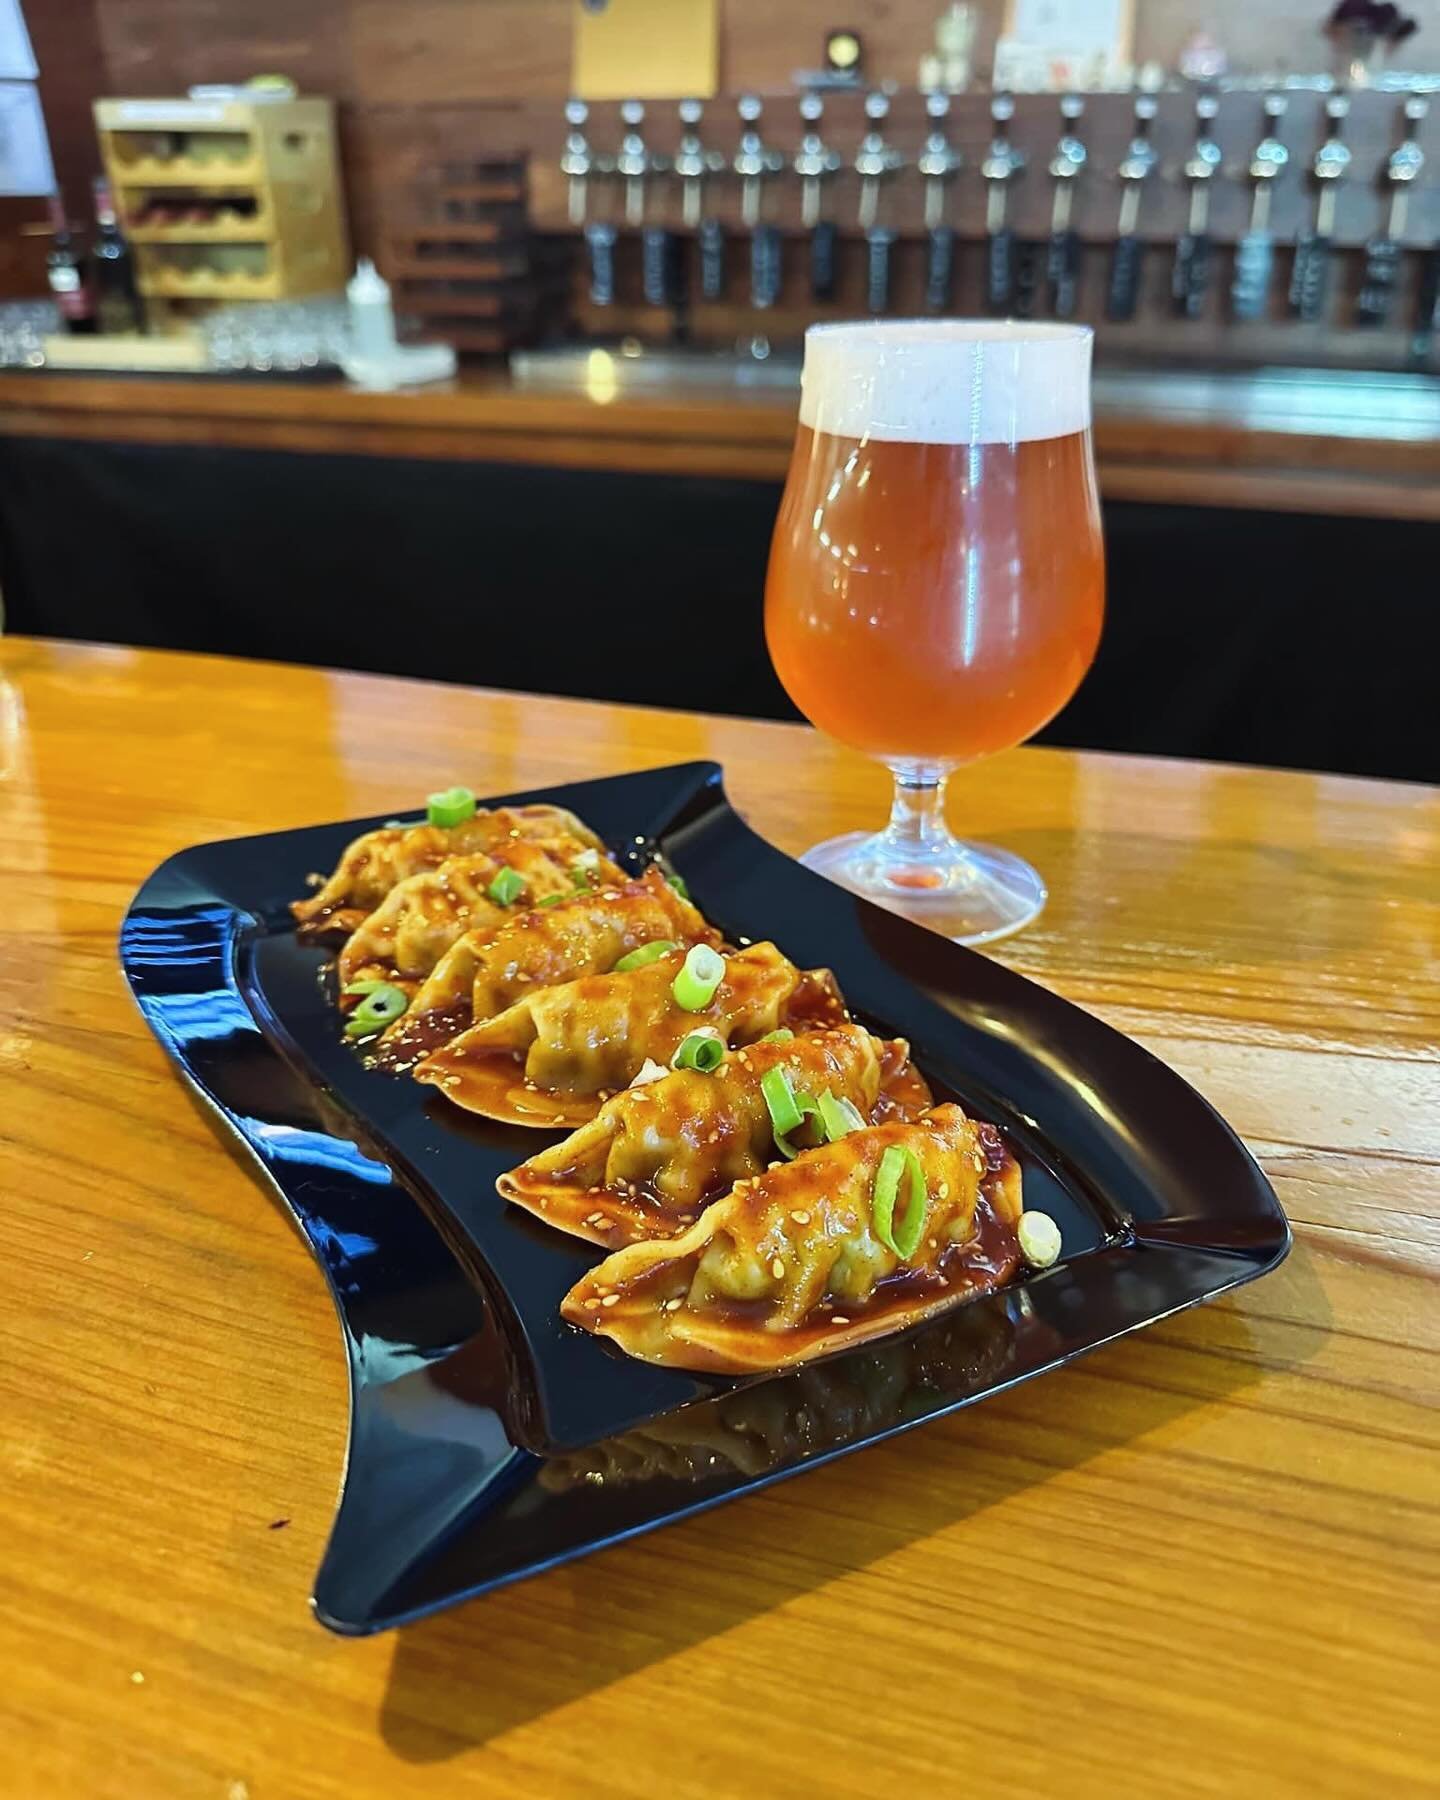 Look what Jeannie&rsquo;s cooking! Dumplings in her signature spicy sauce 🌶️!!! Enjoy some with our new New York beer, a classic cream ale brewed with loganberry.